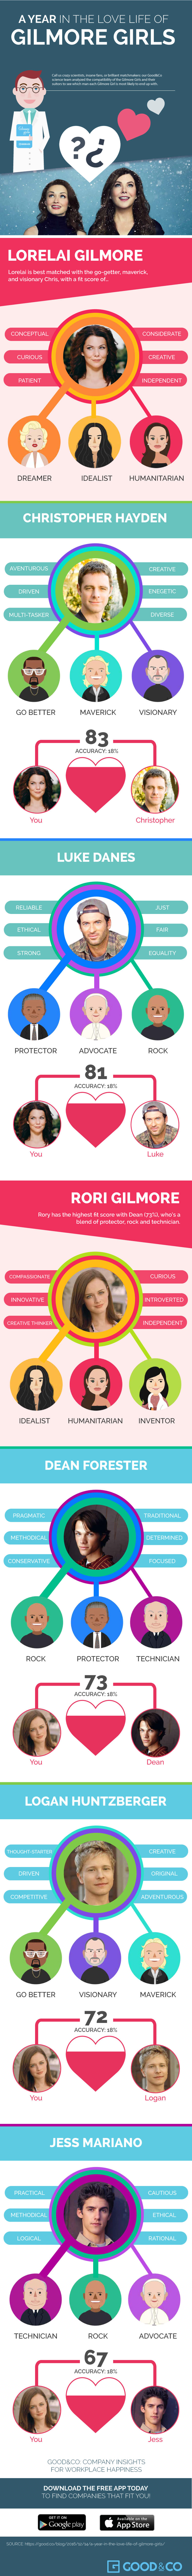 Gilmore Girls infographic / Good&CO -1